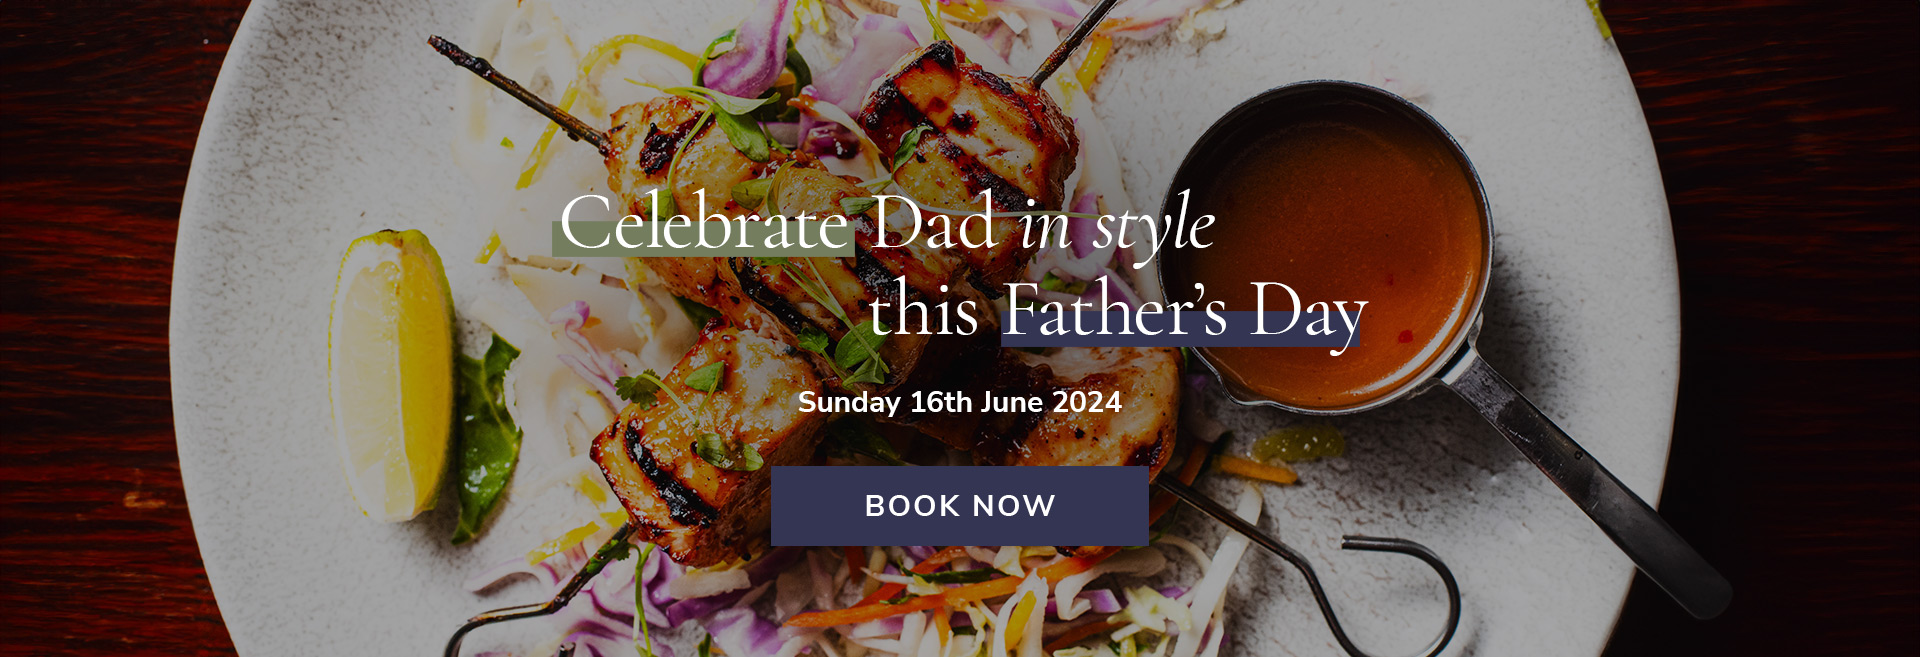 Father's Day at The Angel Inn